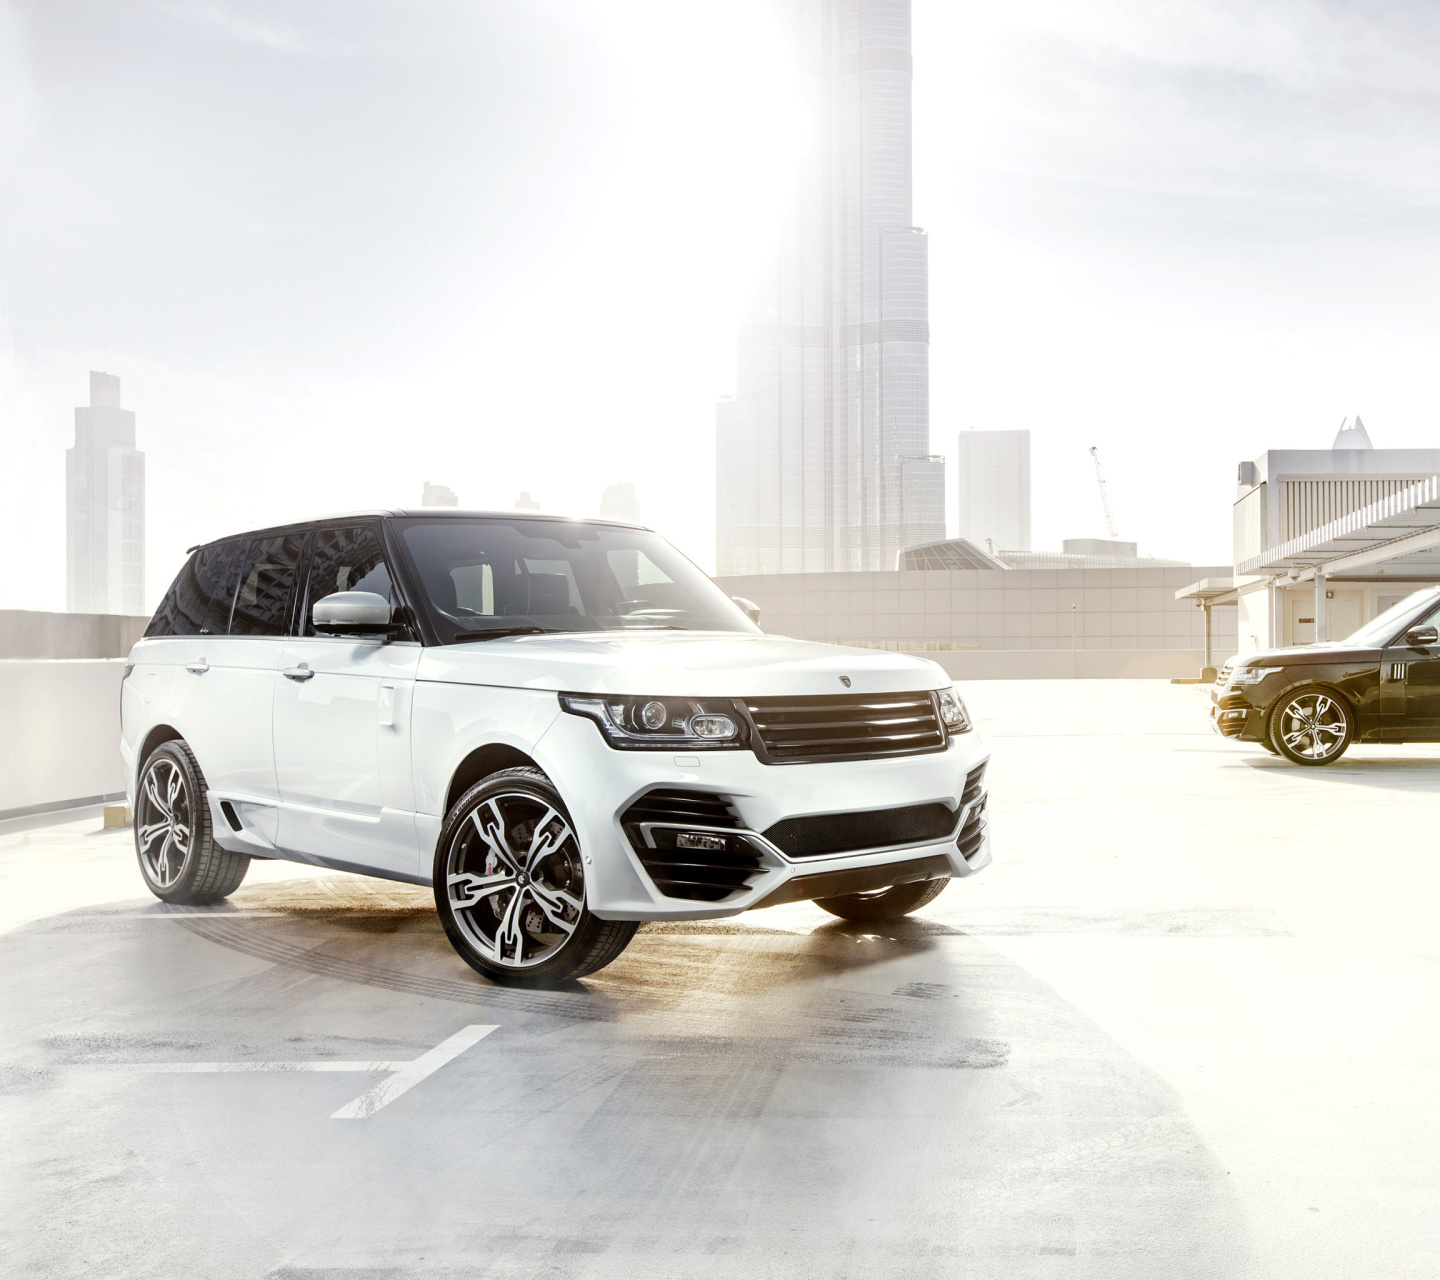 ARES Design Range Rover 600 Supercharged wallpaper 1440x1280